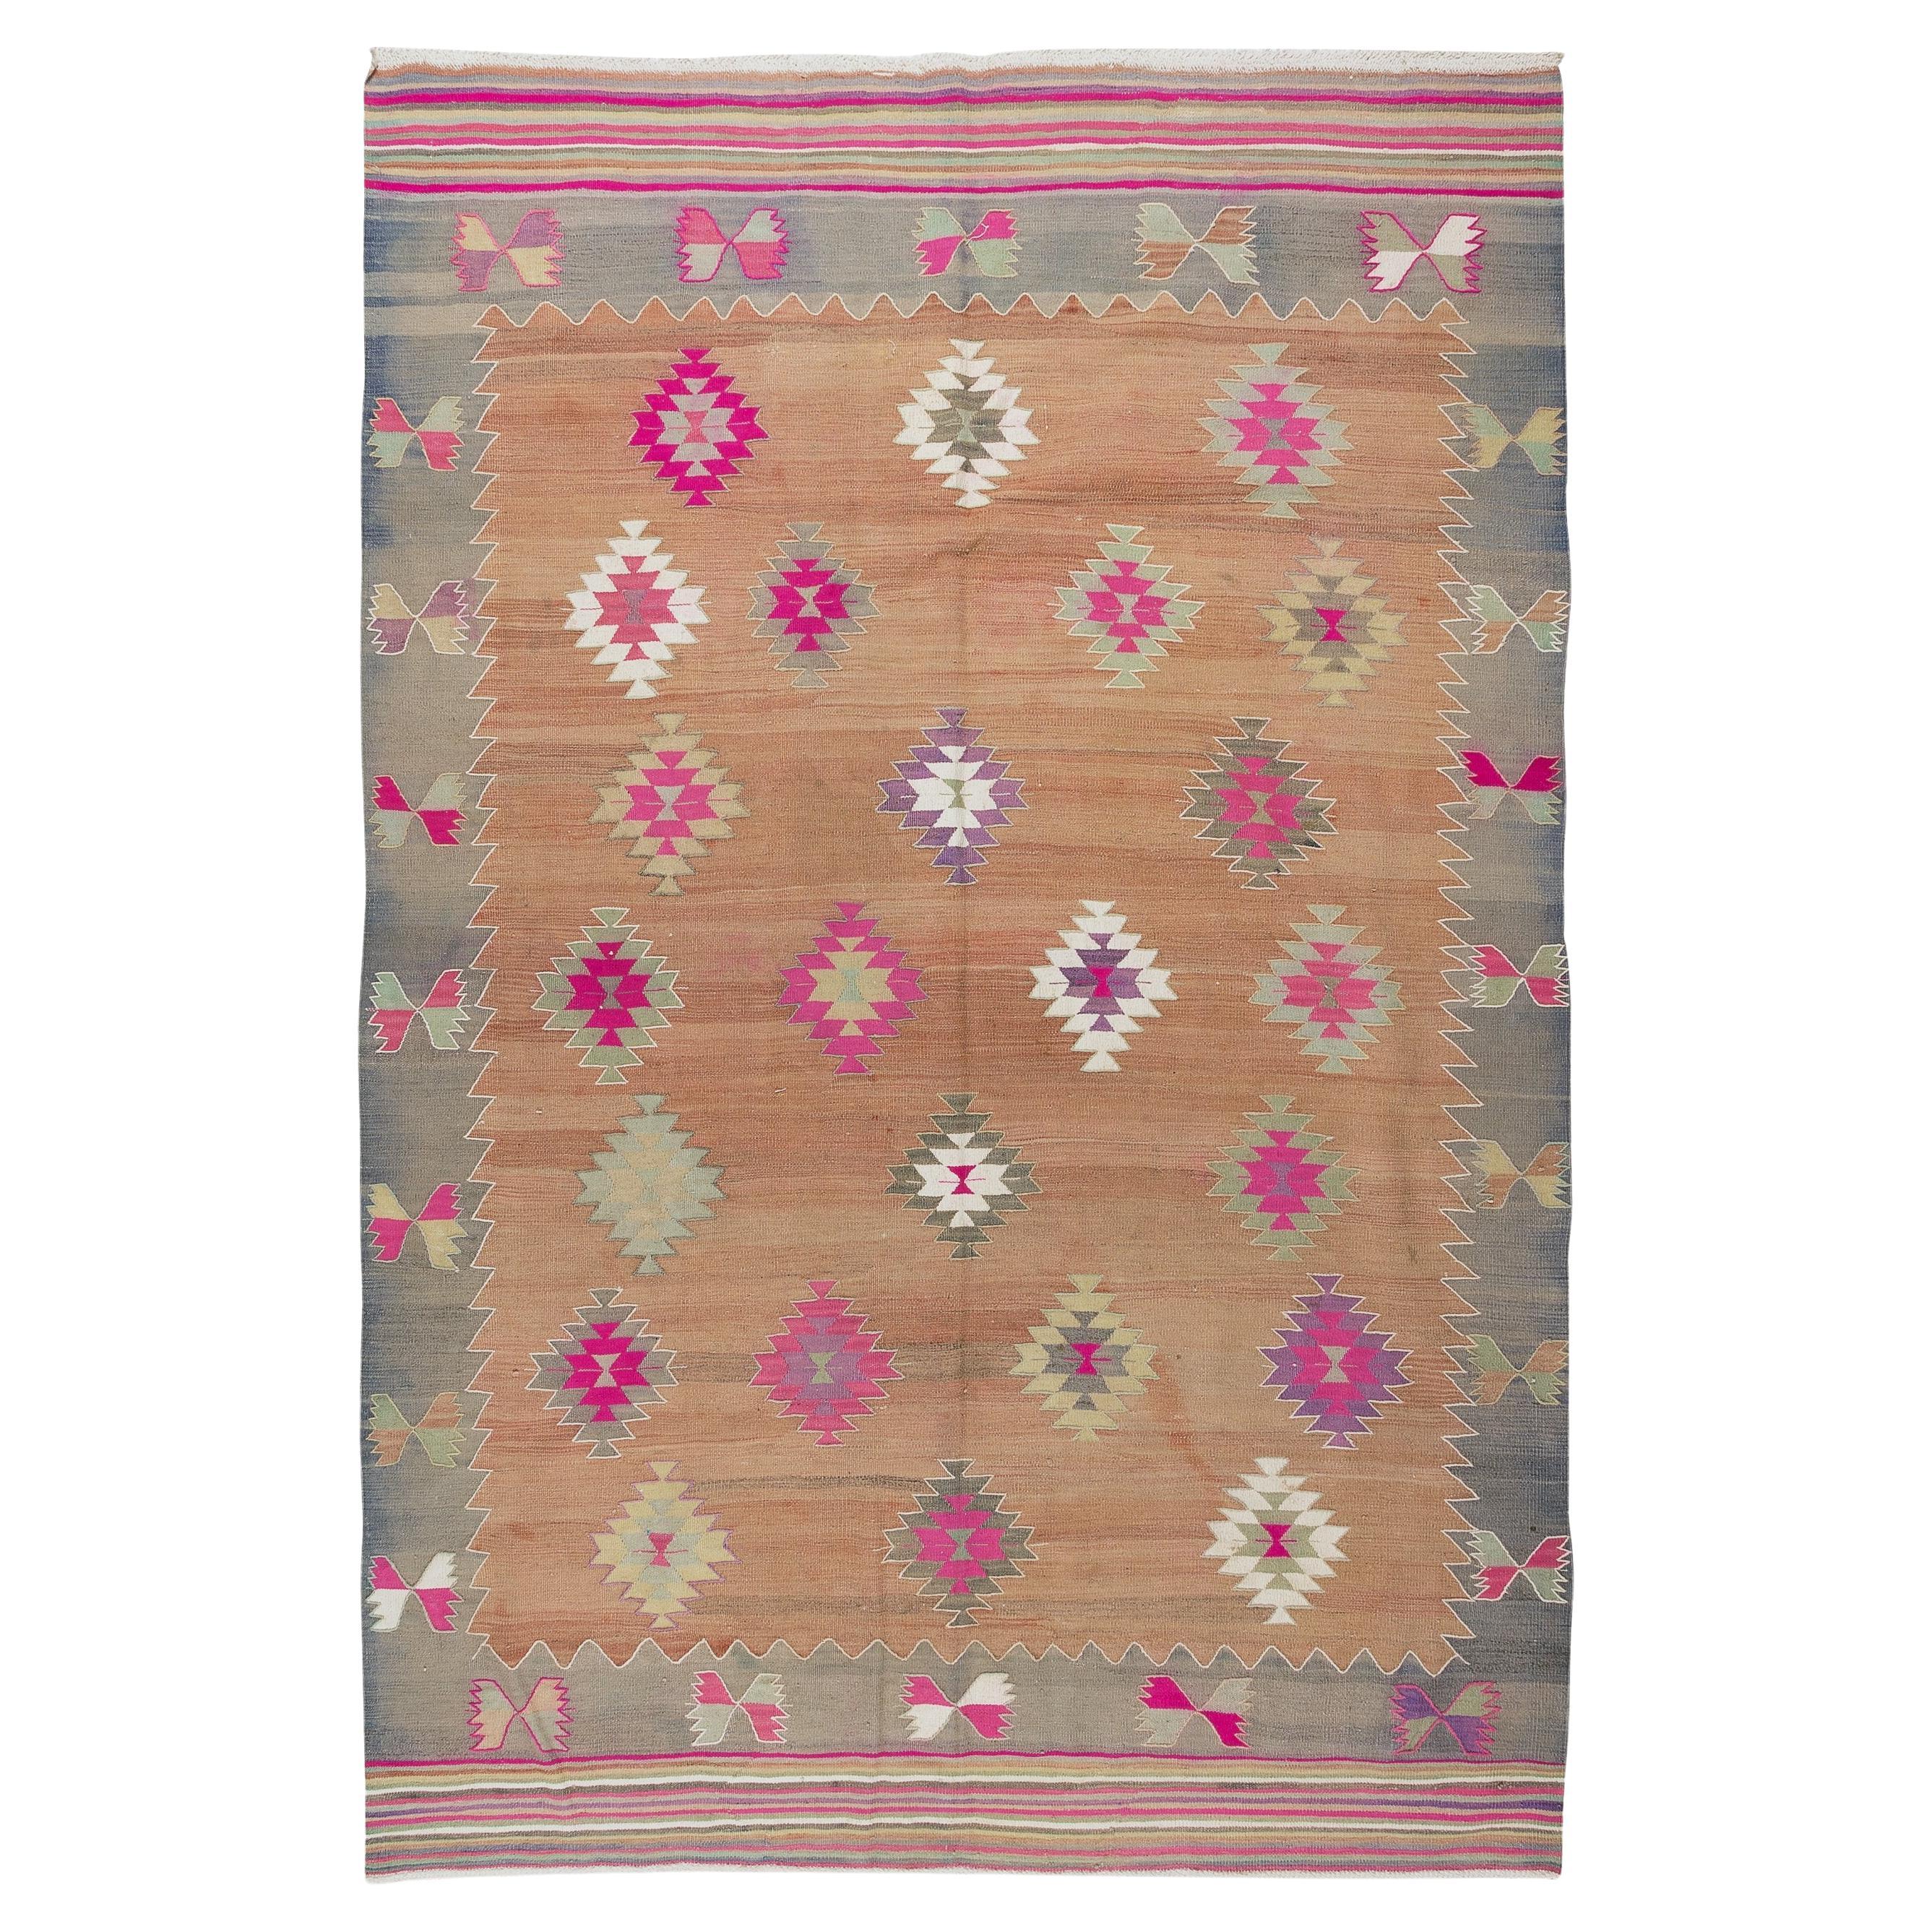 6x8.9 Ft Hand-Woven Vintage Turkish Wool Kilim Rug with Geometric Design For Sale